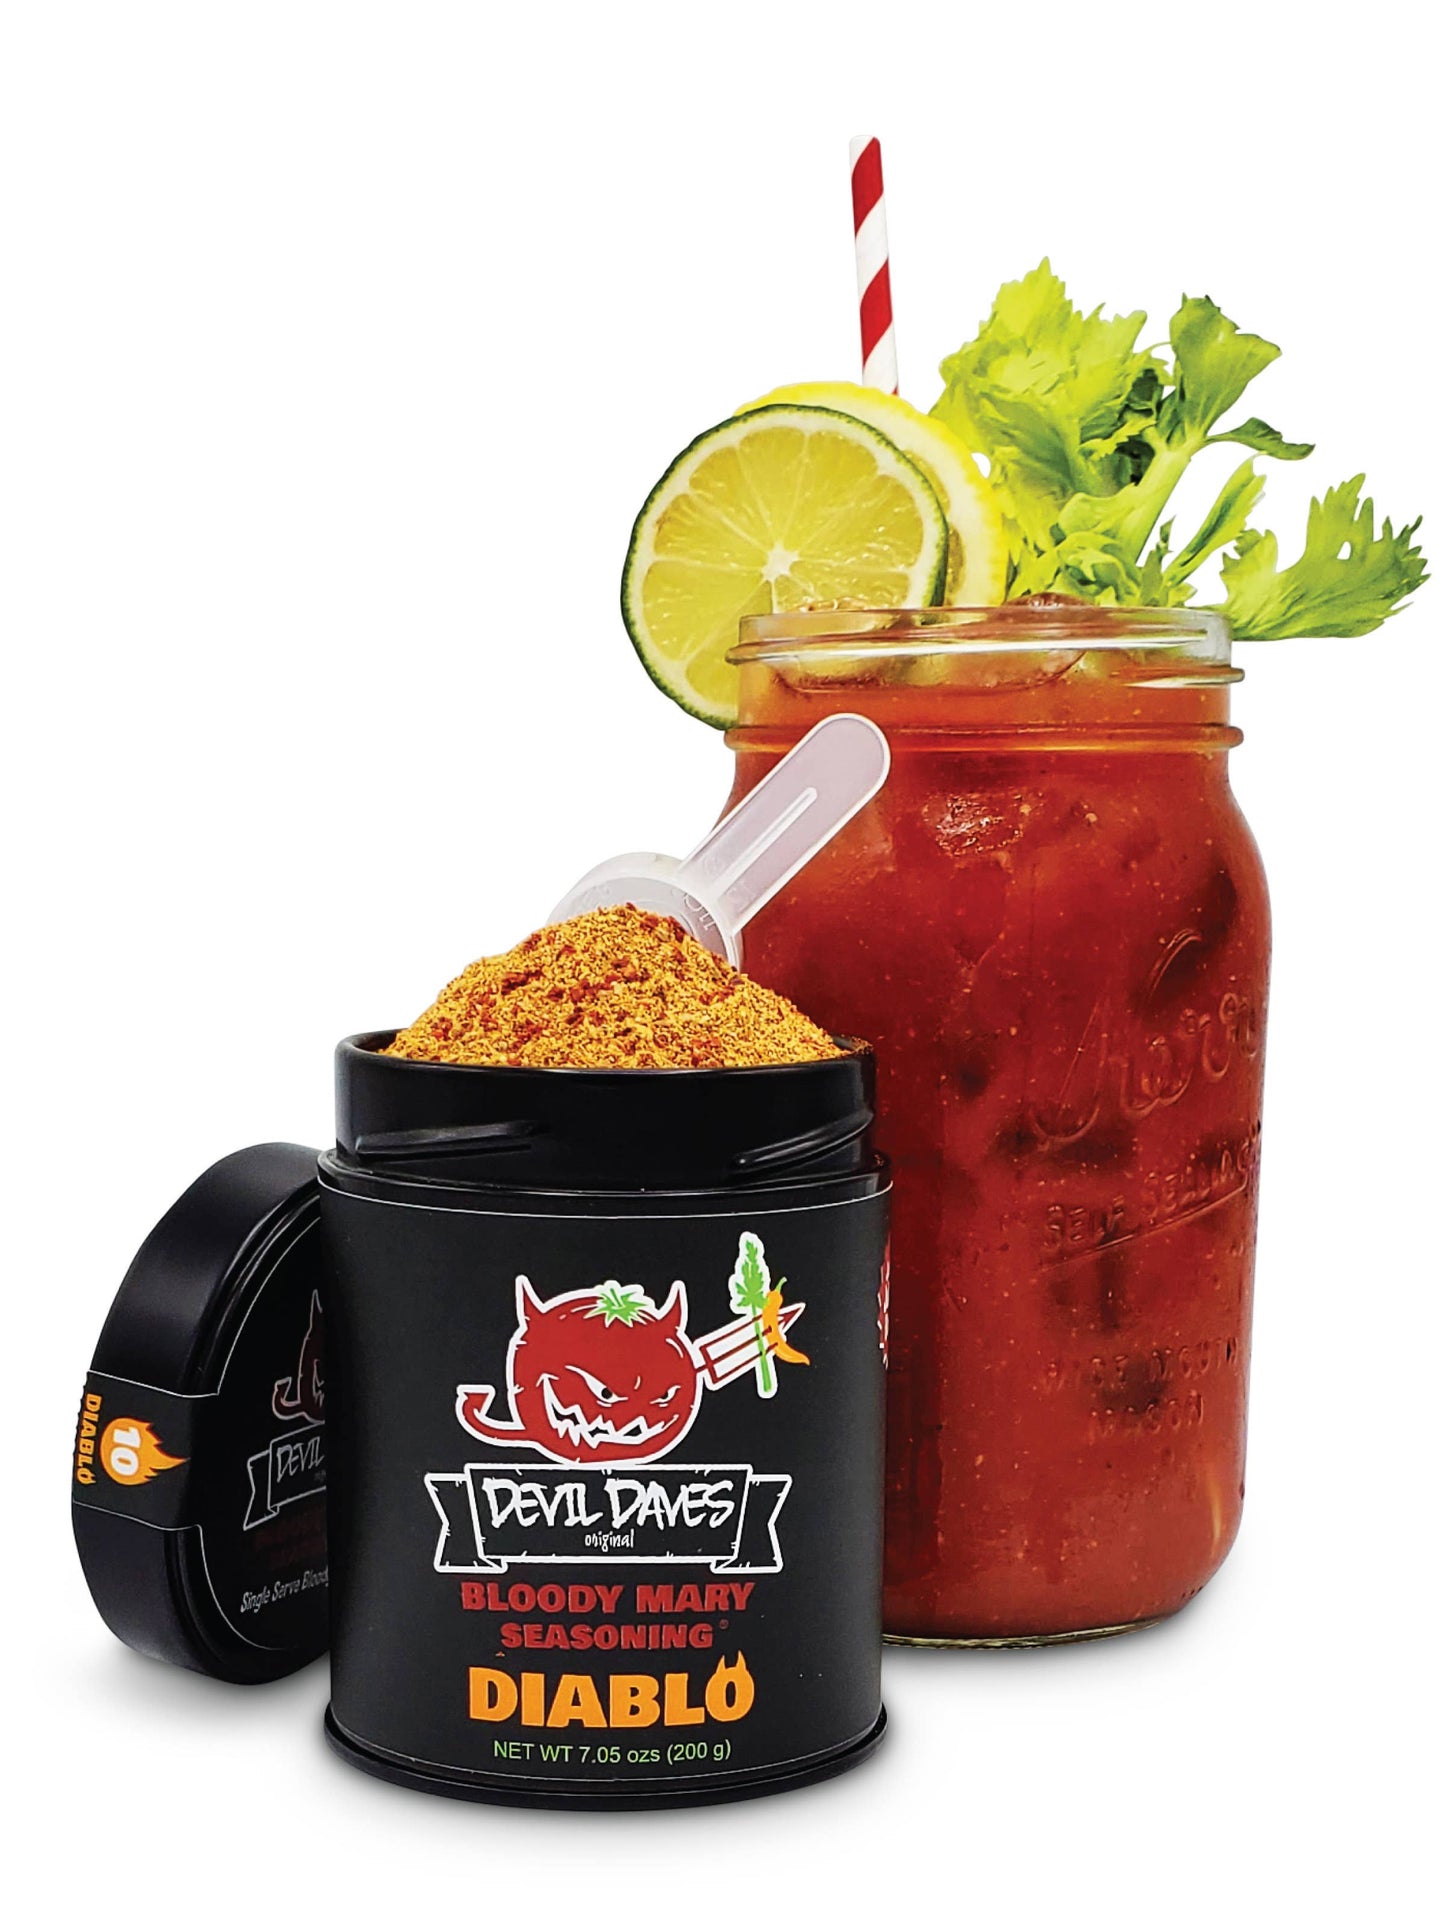 Perfect Gifts Bloody Mary Seasoning Tins